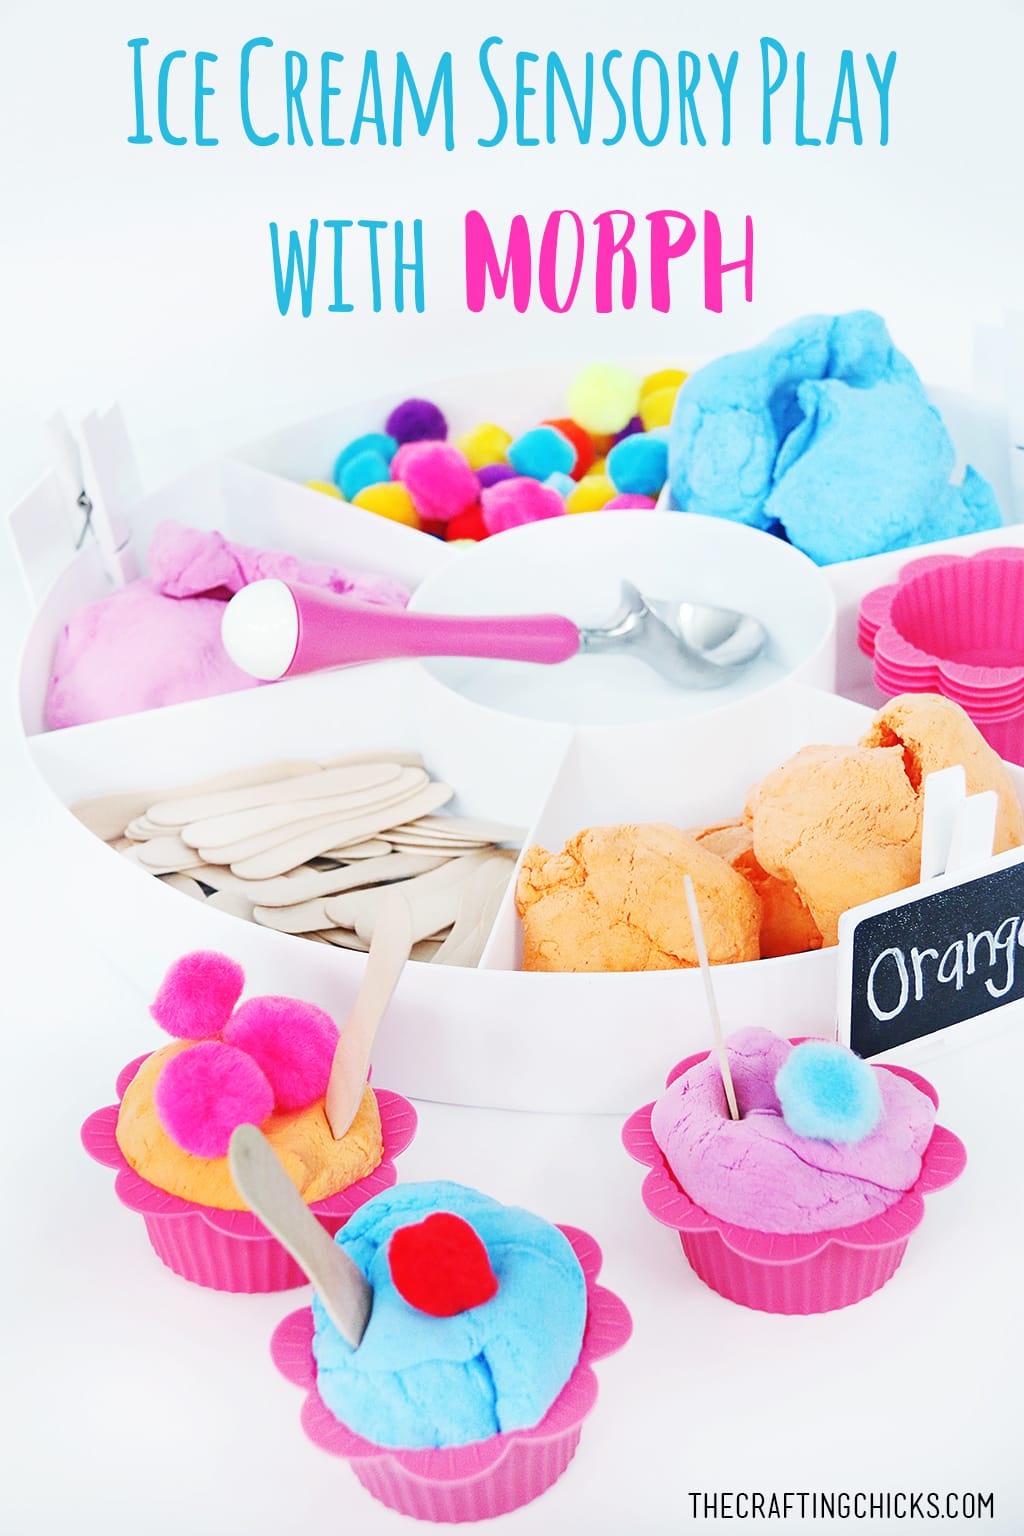 Ice Cream Sensory Play with Morph - A fun and SWEET way to encourage hands-on sensory and creative play!